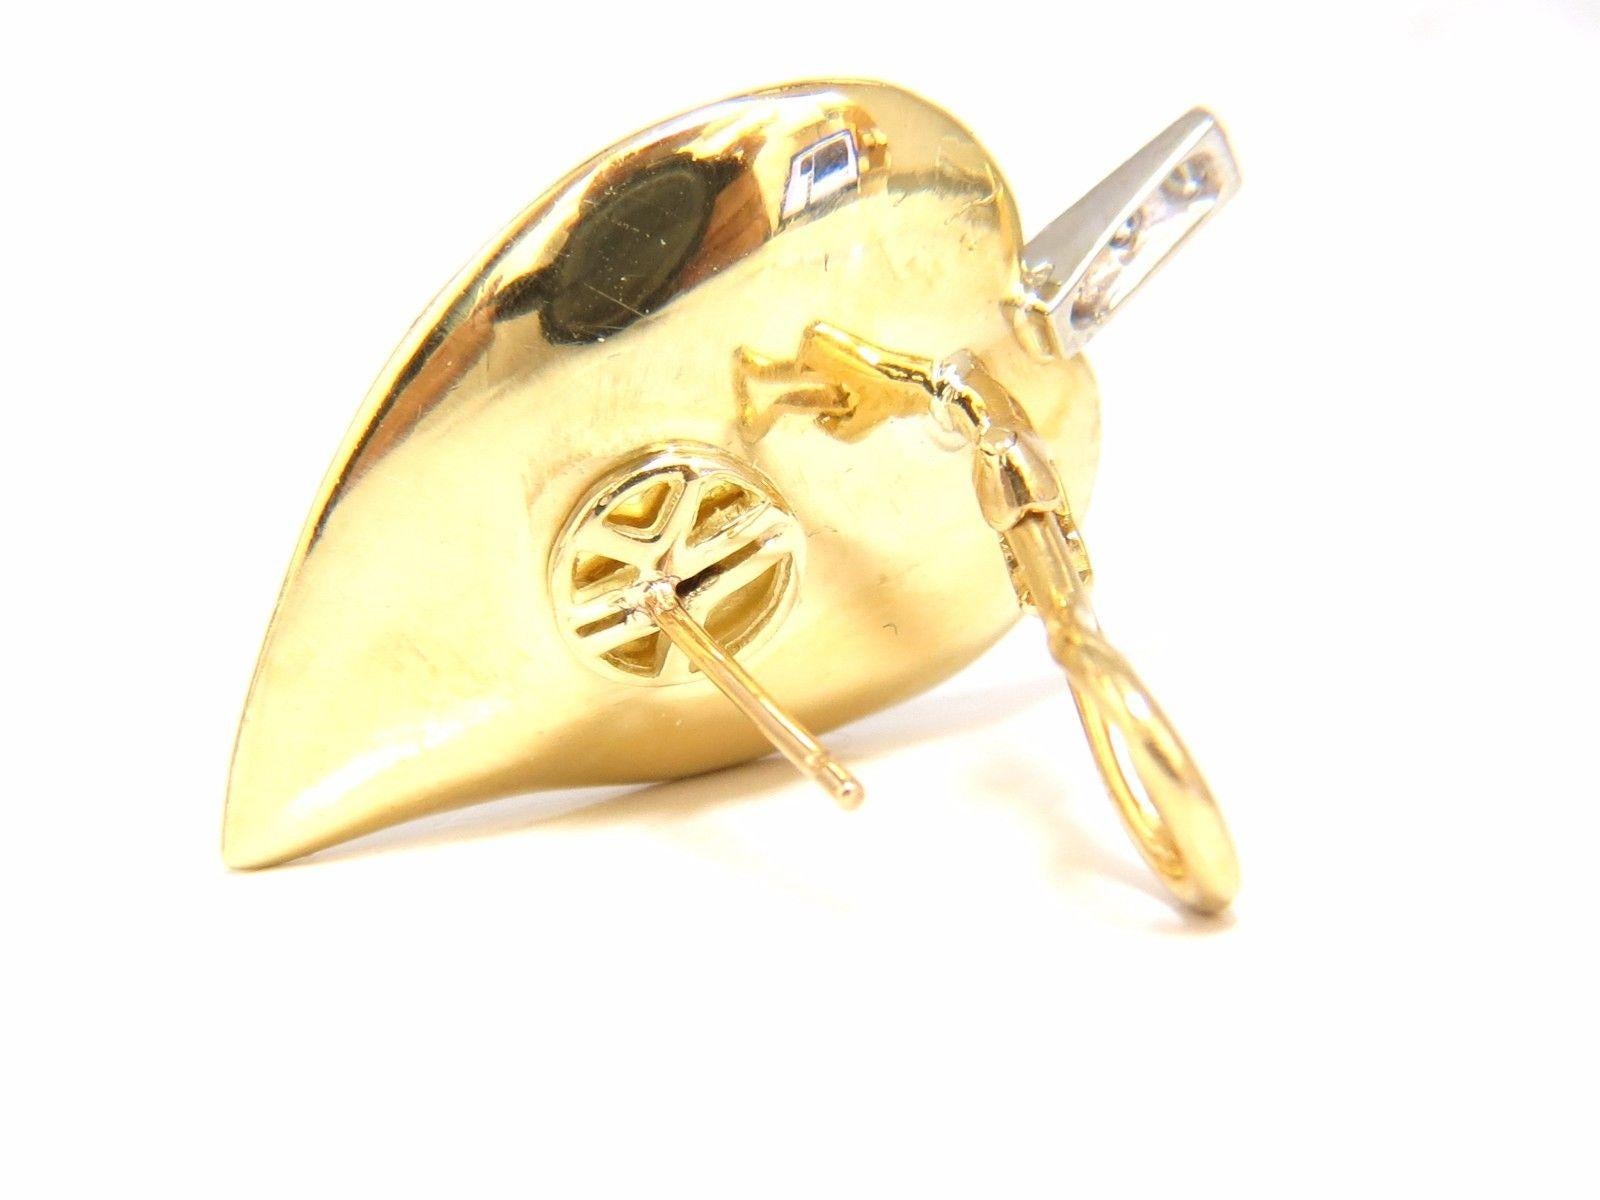 Natural Matrix Raw Sliced quartz & Diamond Leaf Earrings.

Diamonds Total Weight: .25ct.

Rounds & Full cuts.

G-color vs-2 clarity.

18kt. yellow gold

17 grams.

Earrings measure: 1.27 X .80 inch 

Comfortable omega closure

(please observe maker